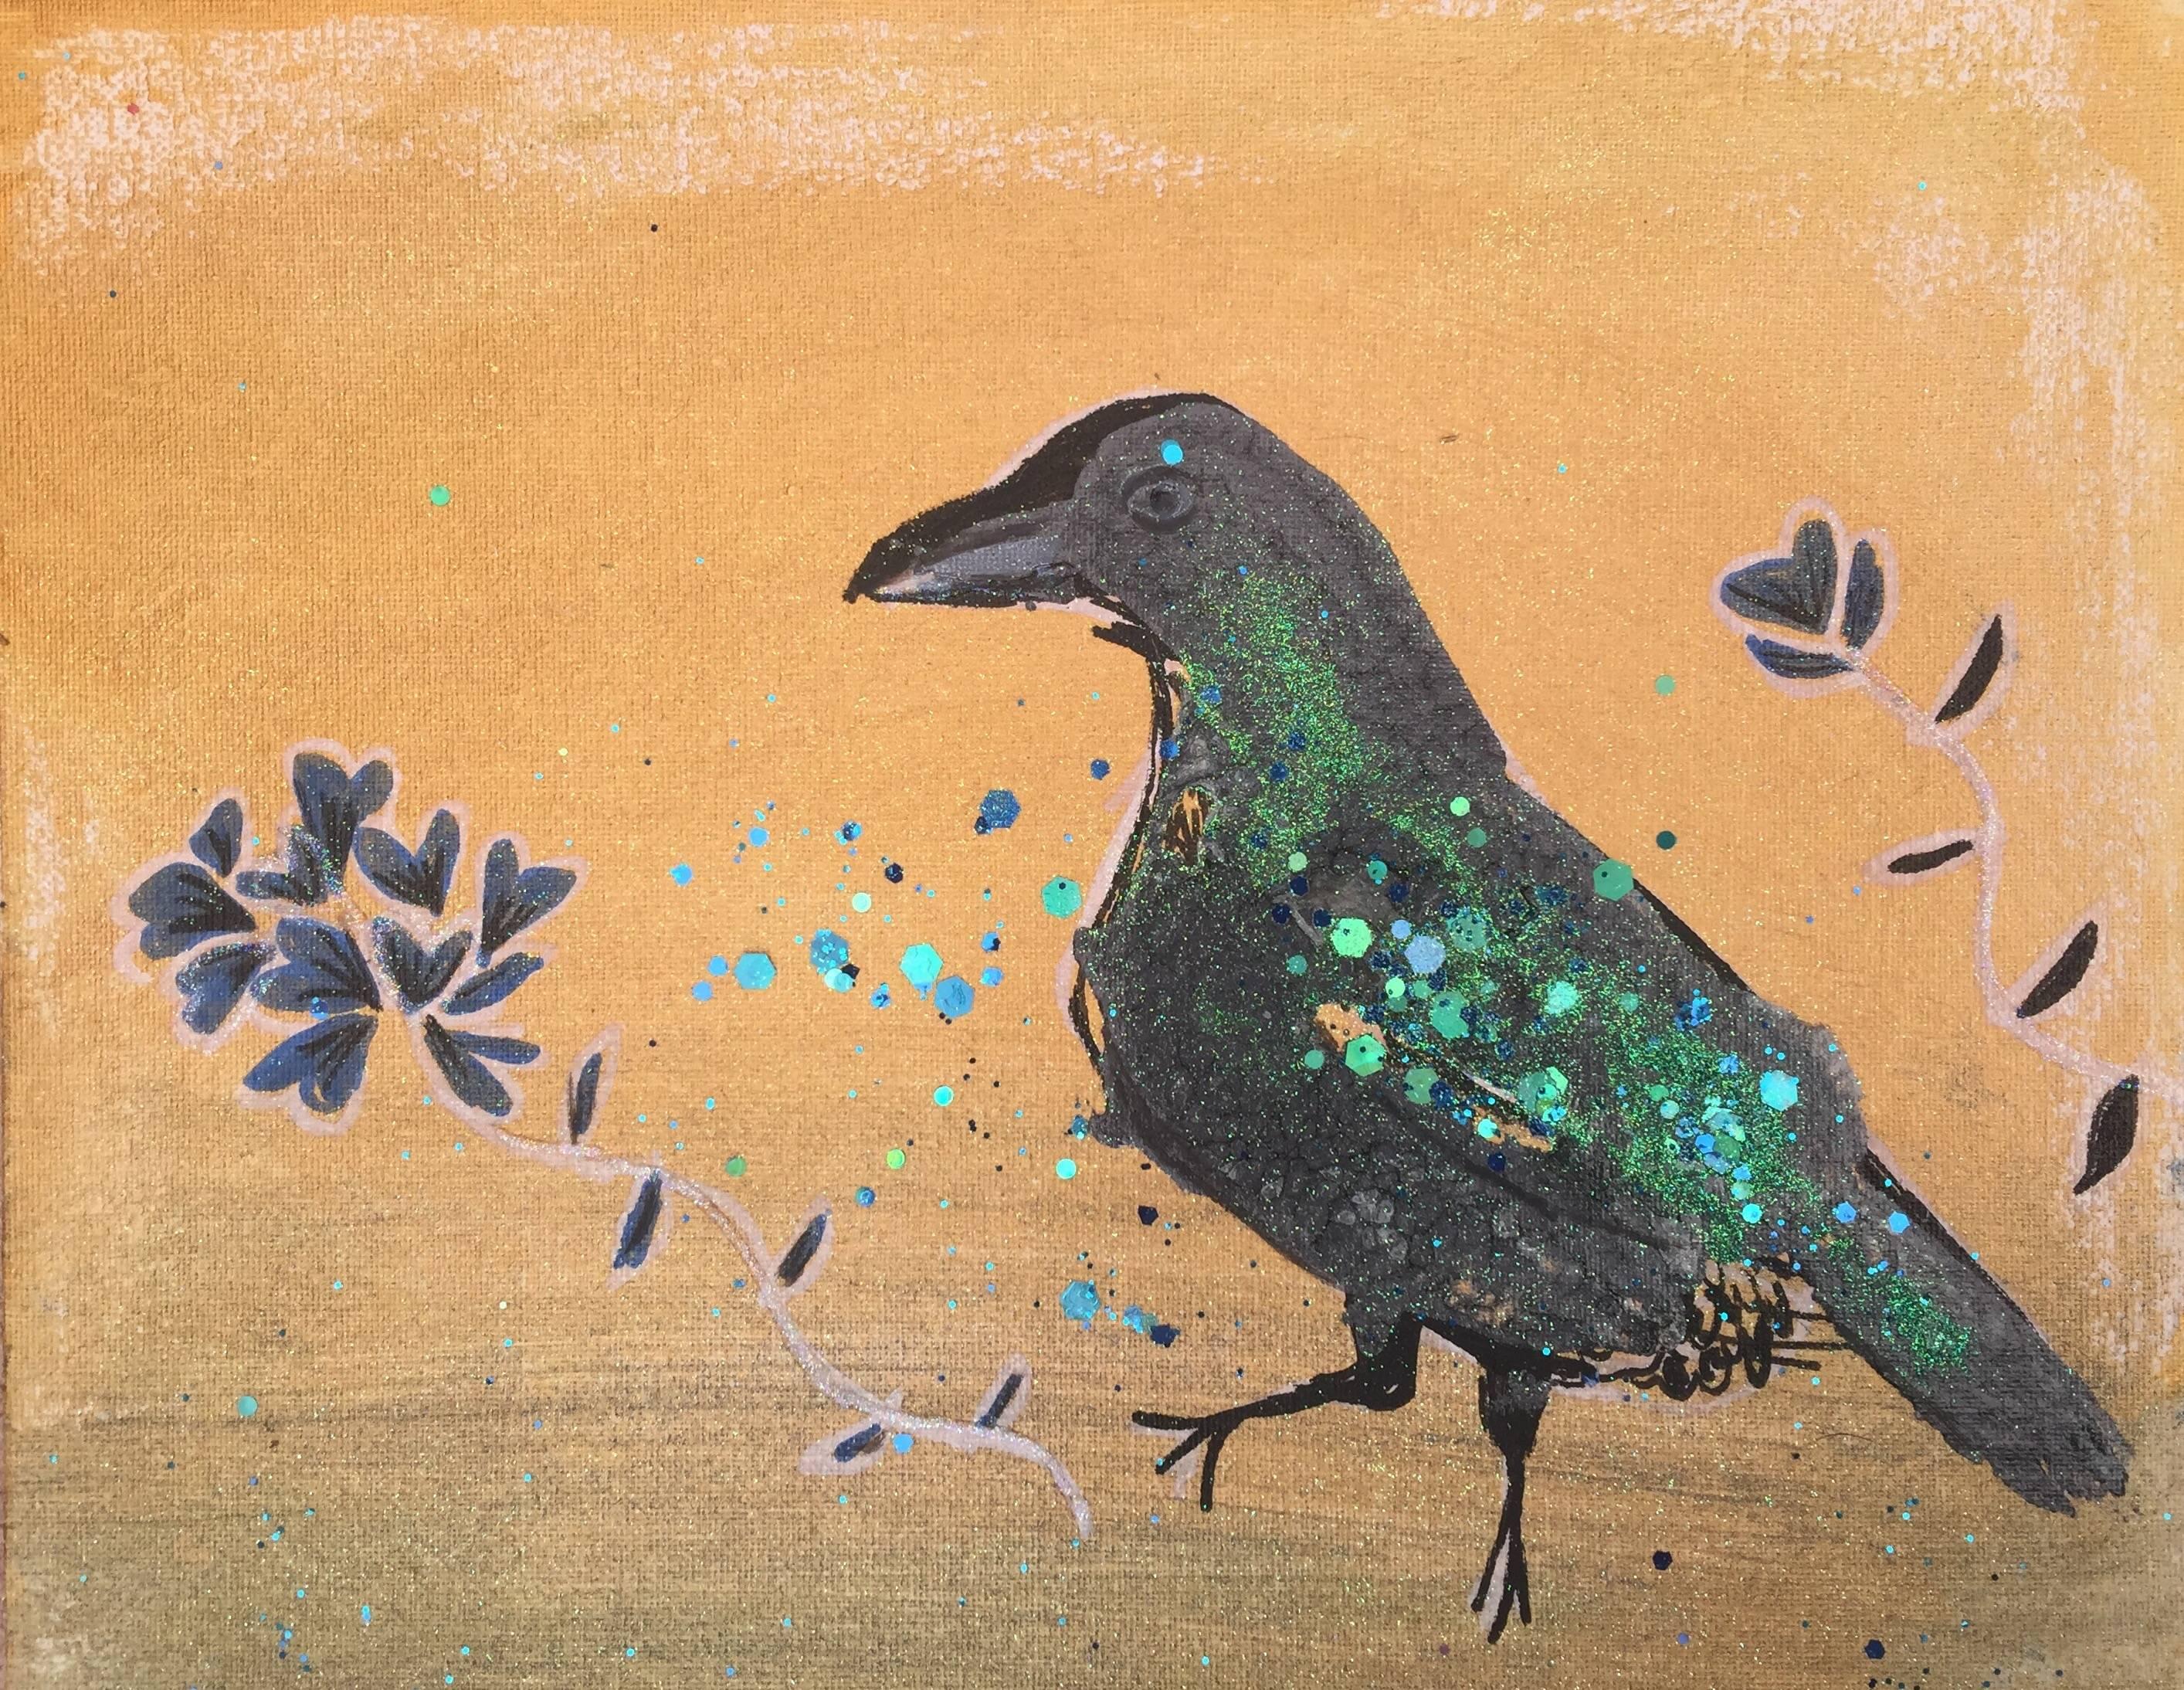 Claire Westwood Animal Painting - Dancing Raven, Original, Blue Black Raven, Gold, Paper, Mermaid Glitter, Signed